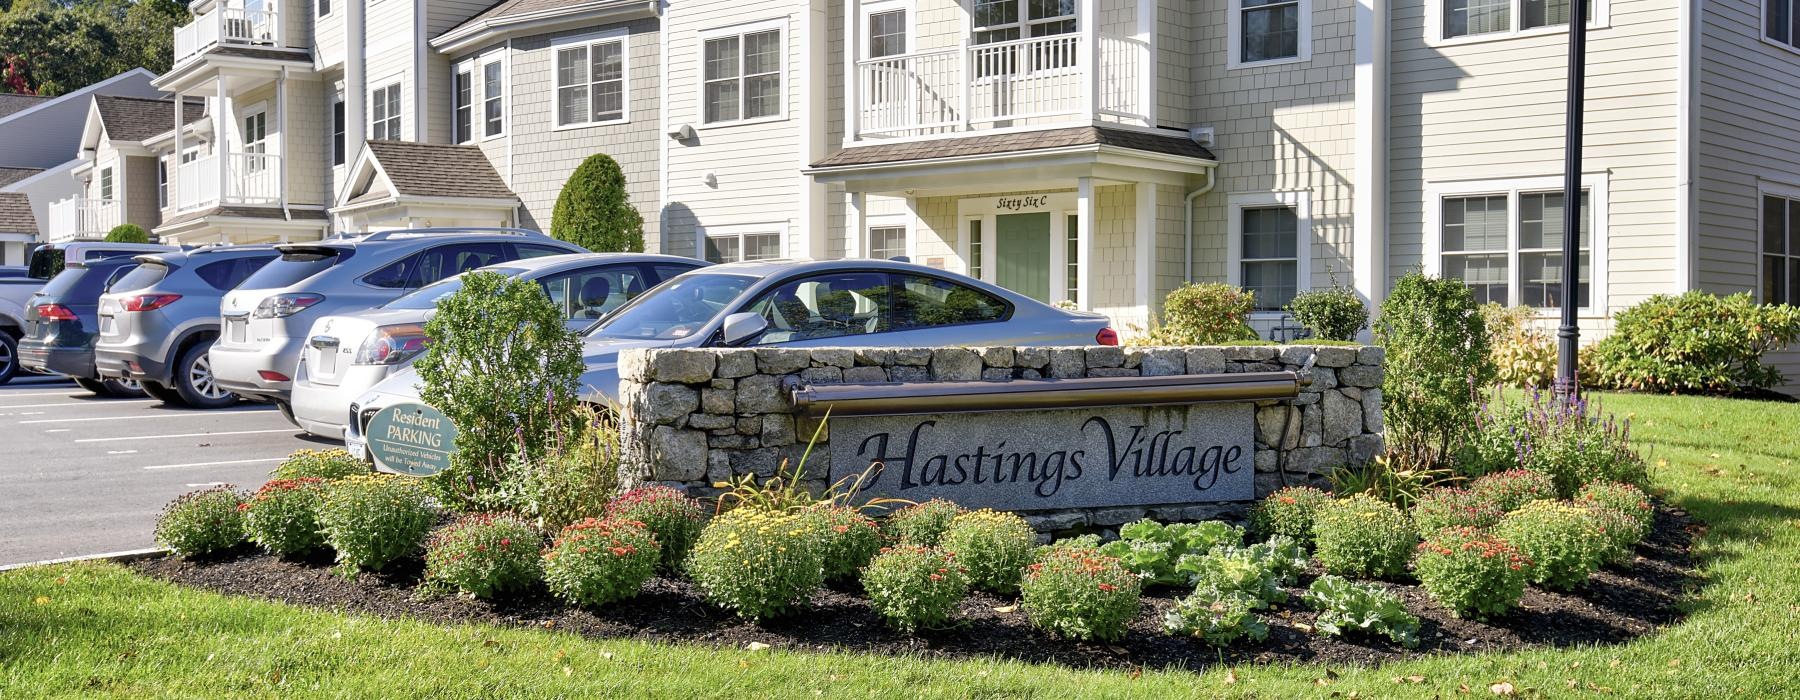 Hastings Village stone sign at property entrance